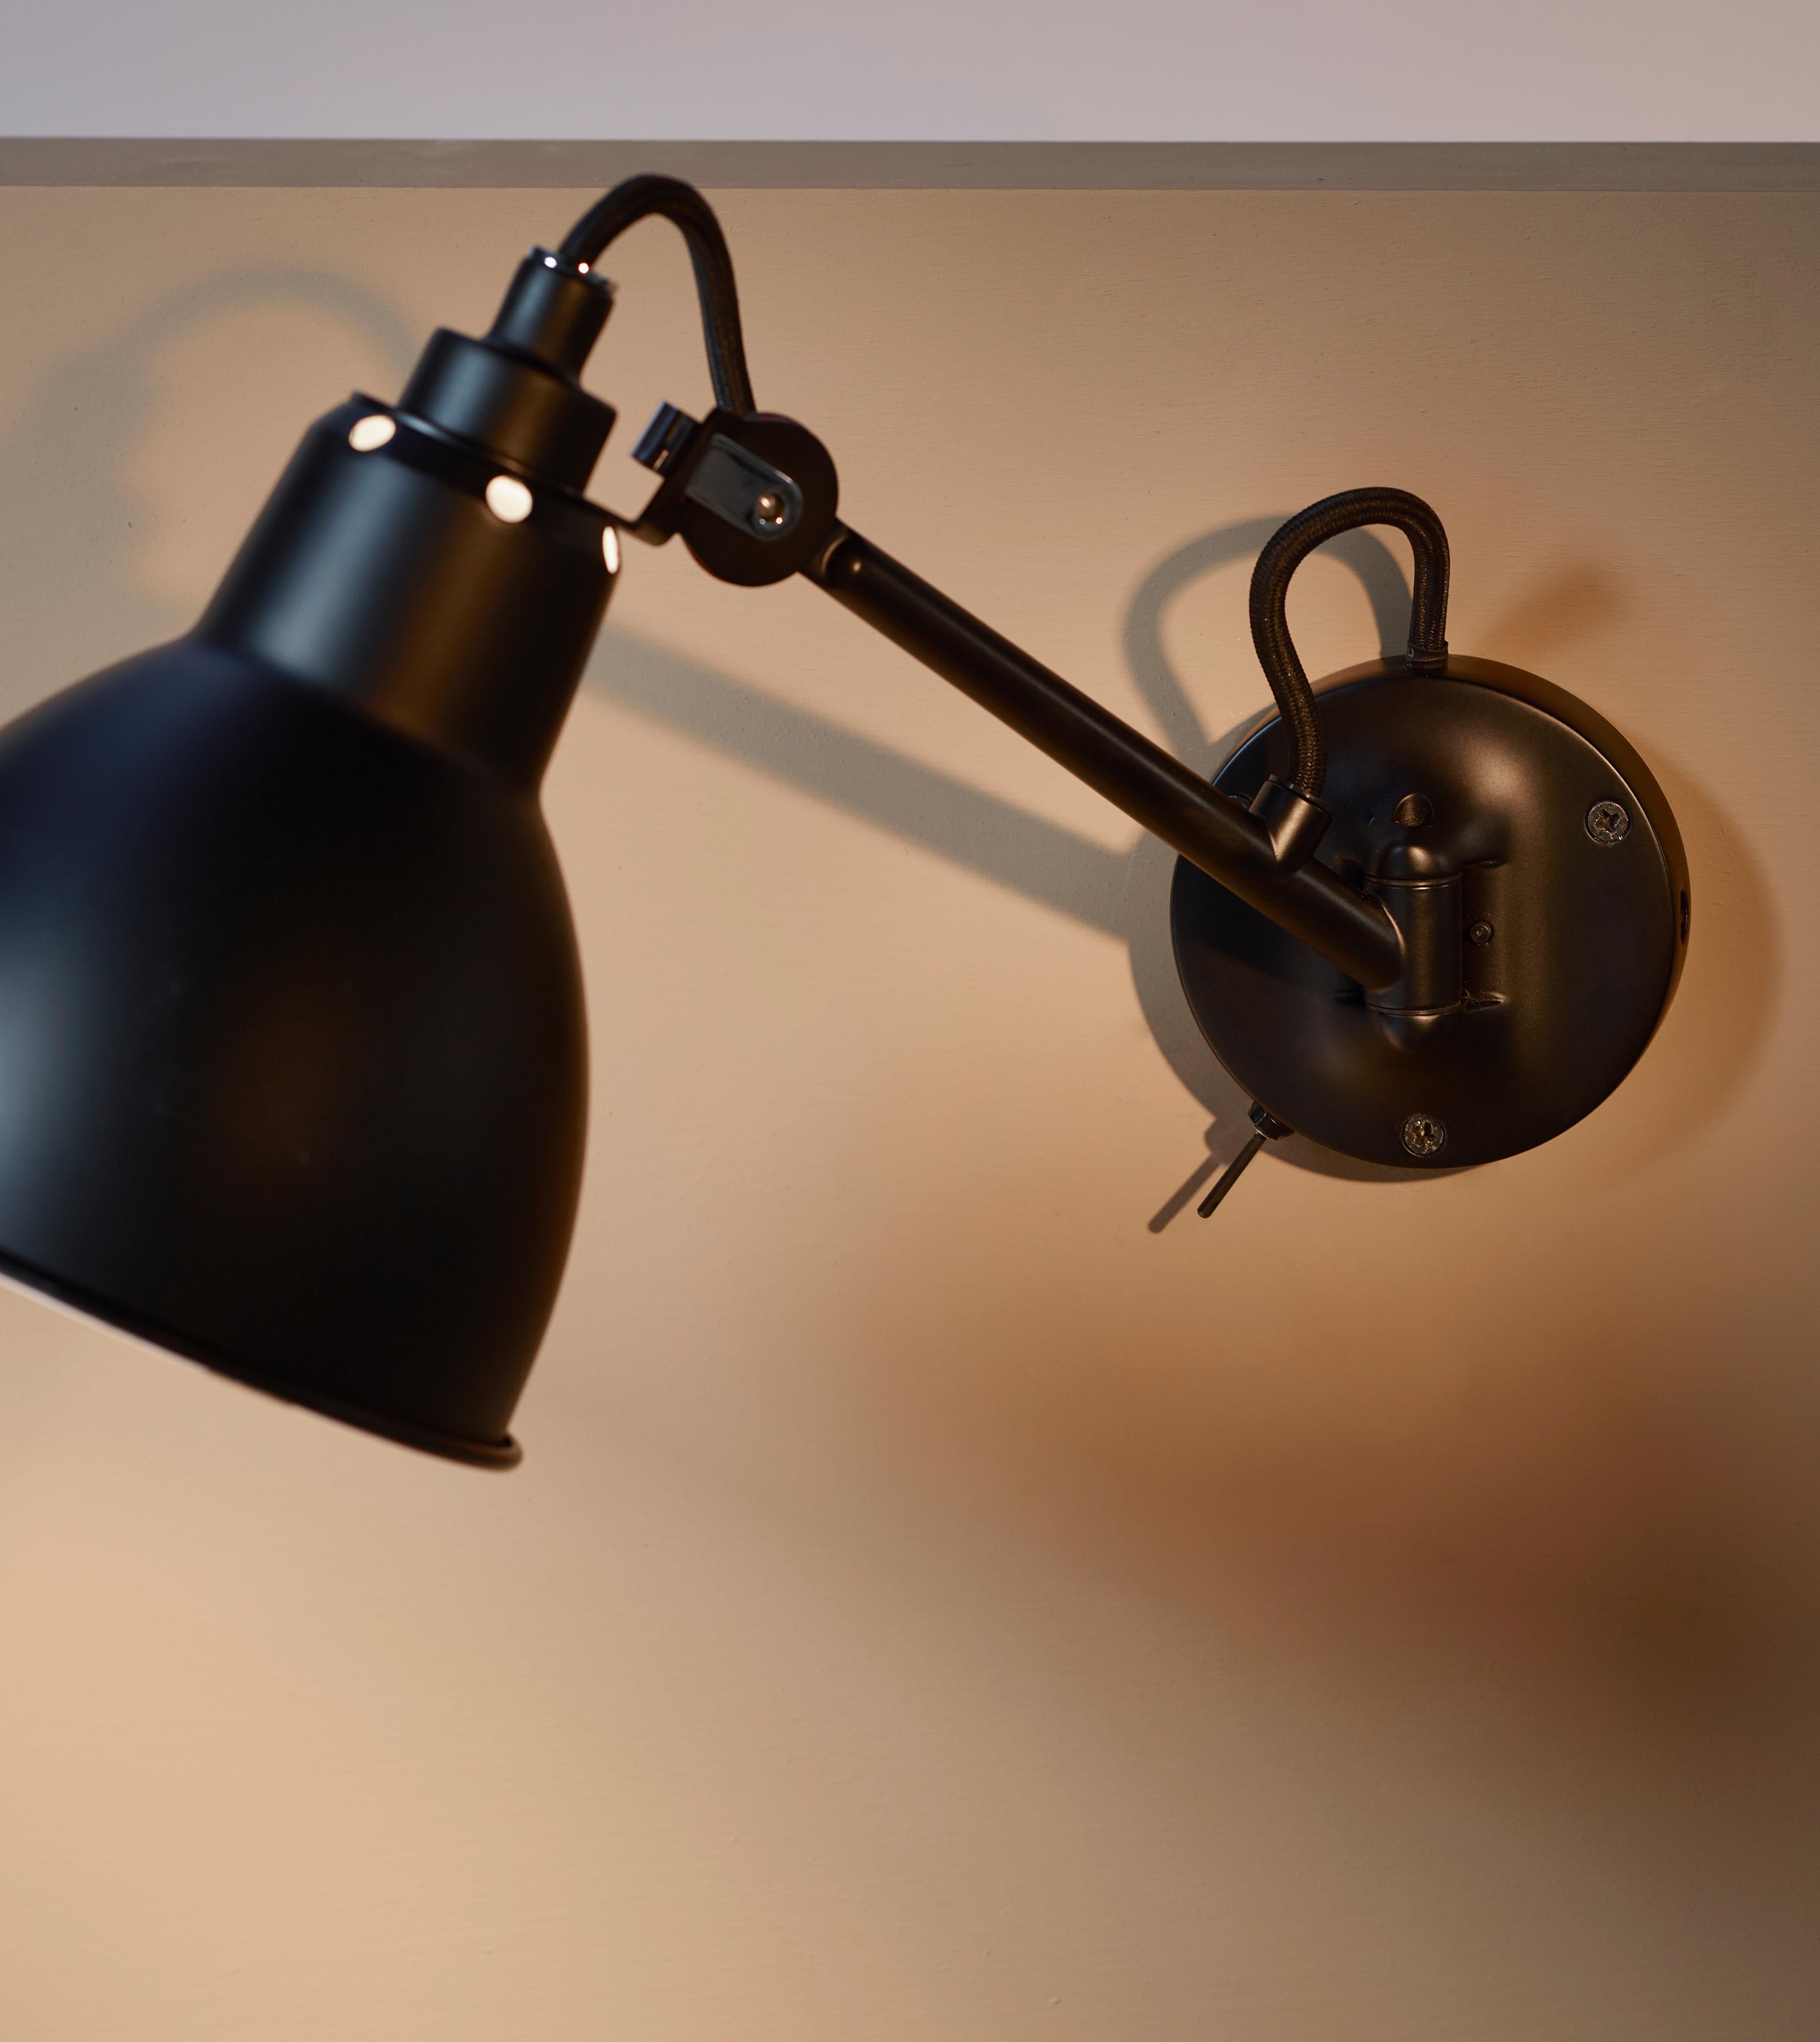 DCW Editions La Lampe Gras N°104 SW Wall Lamp in Black Steel Arm and Black Copper Shade by Bernard-Albin Gras
 
 In 1921 Bernard-Albin GRAS designed a series of lamps for use in offices and in industrial environments. The GRAS lamp, as it was